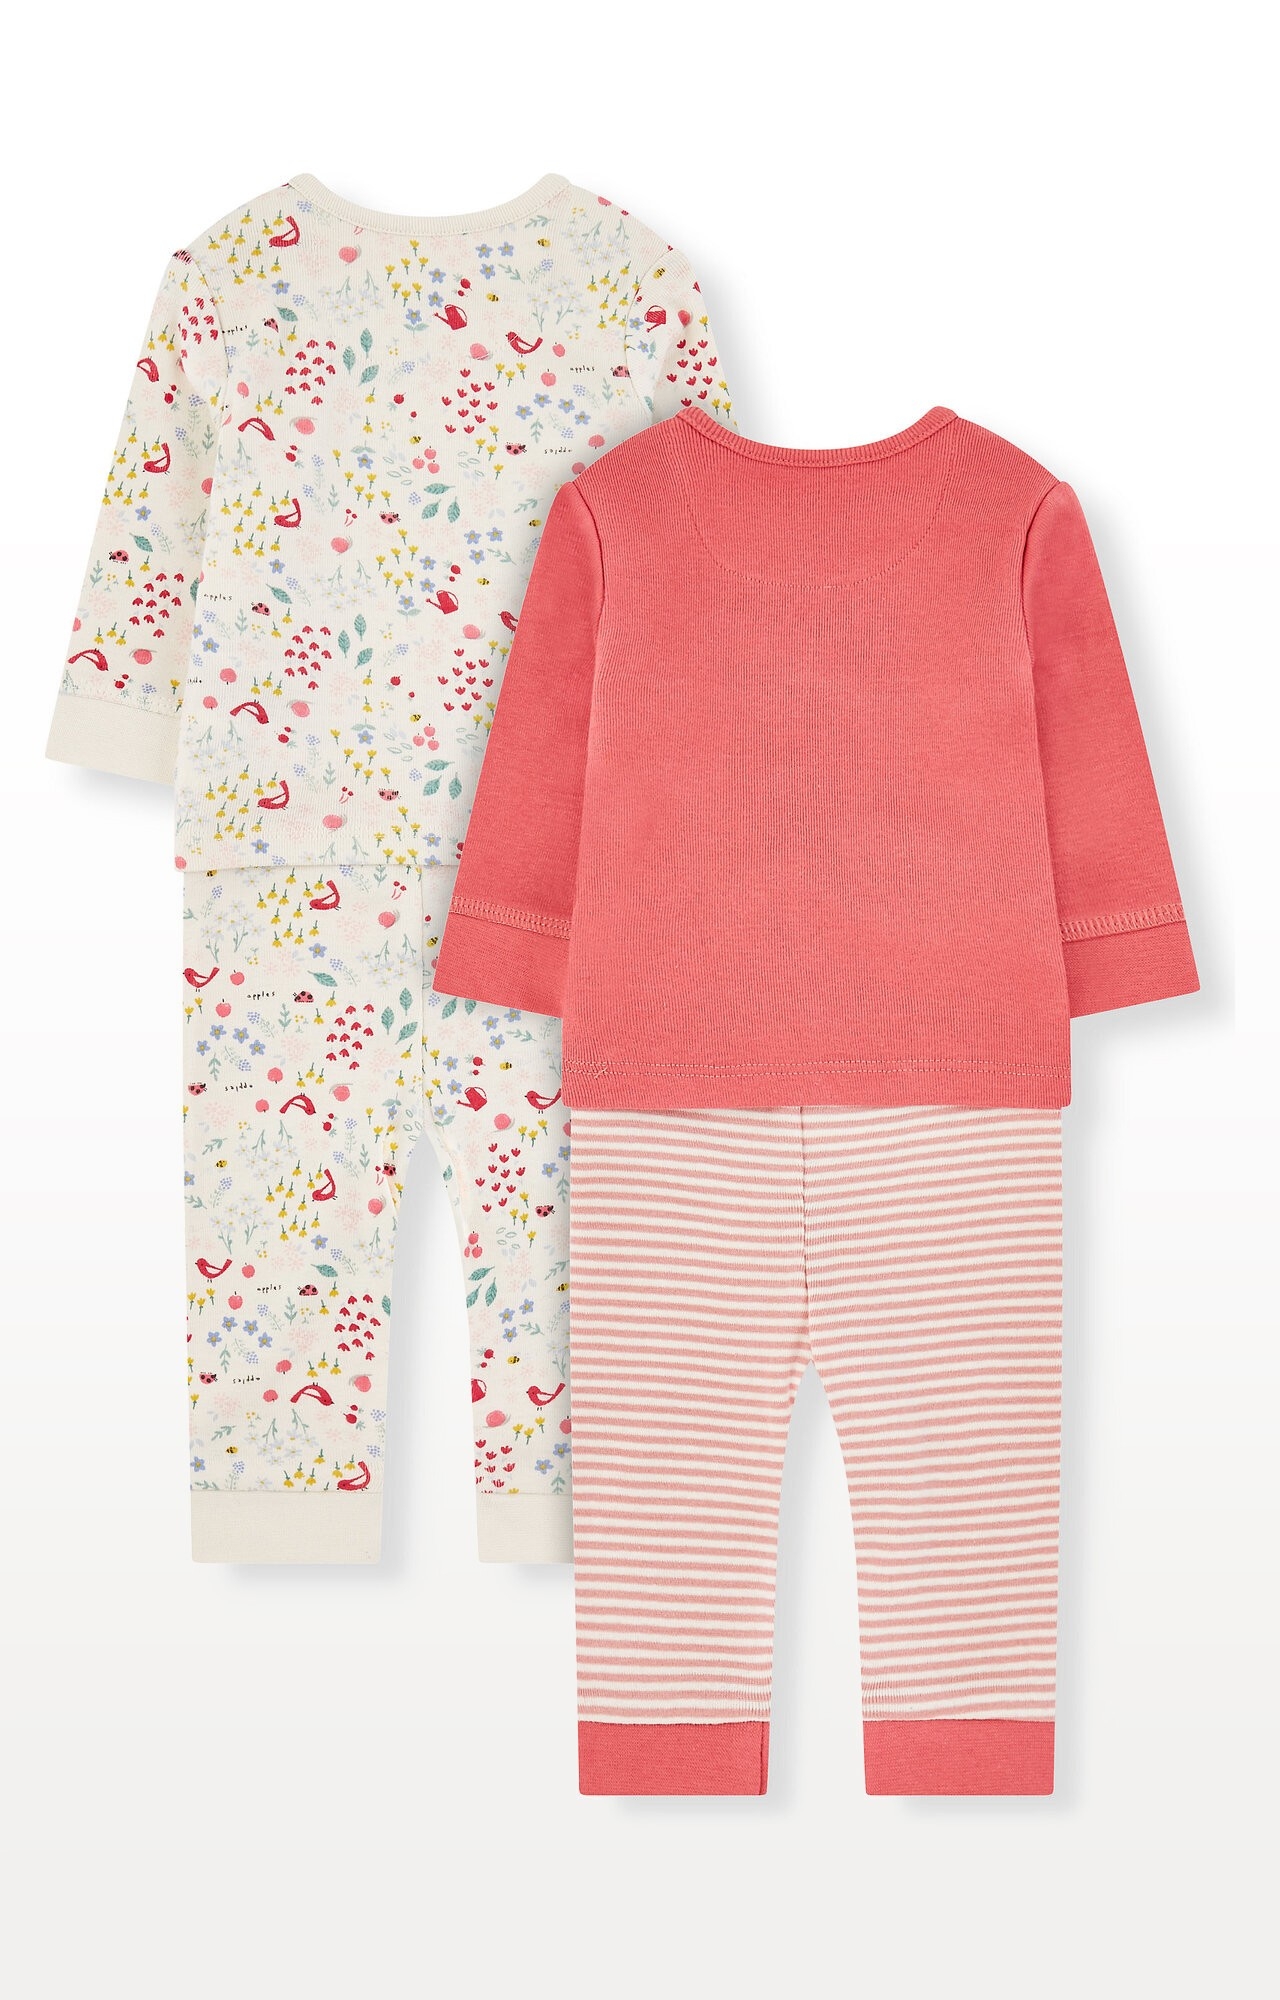 Mothercare | Floral Little Friends Pyjamas - Pack of 2 1